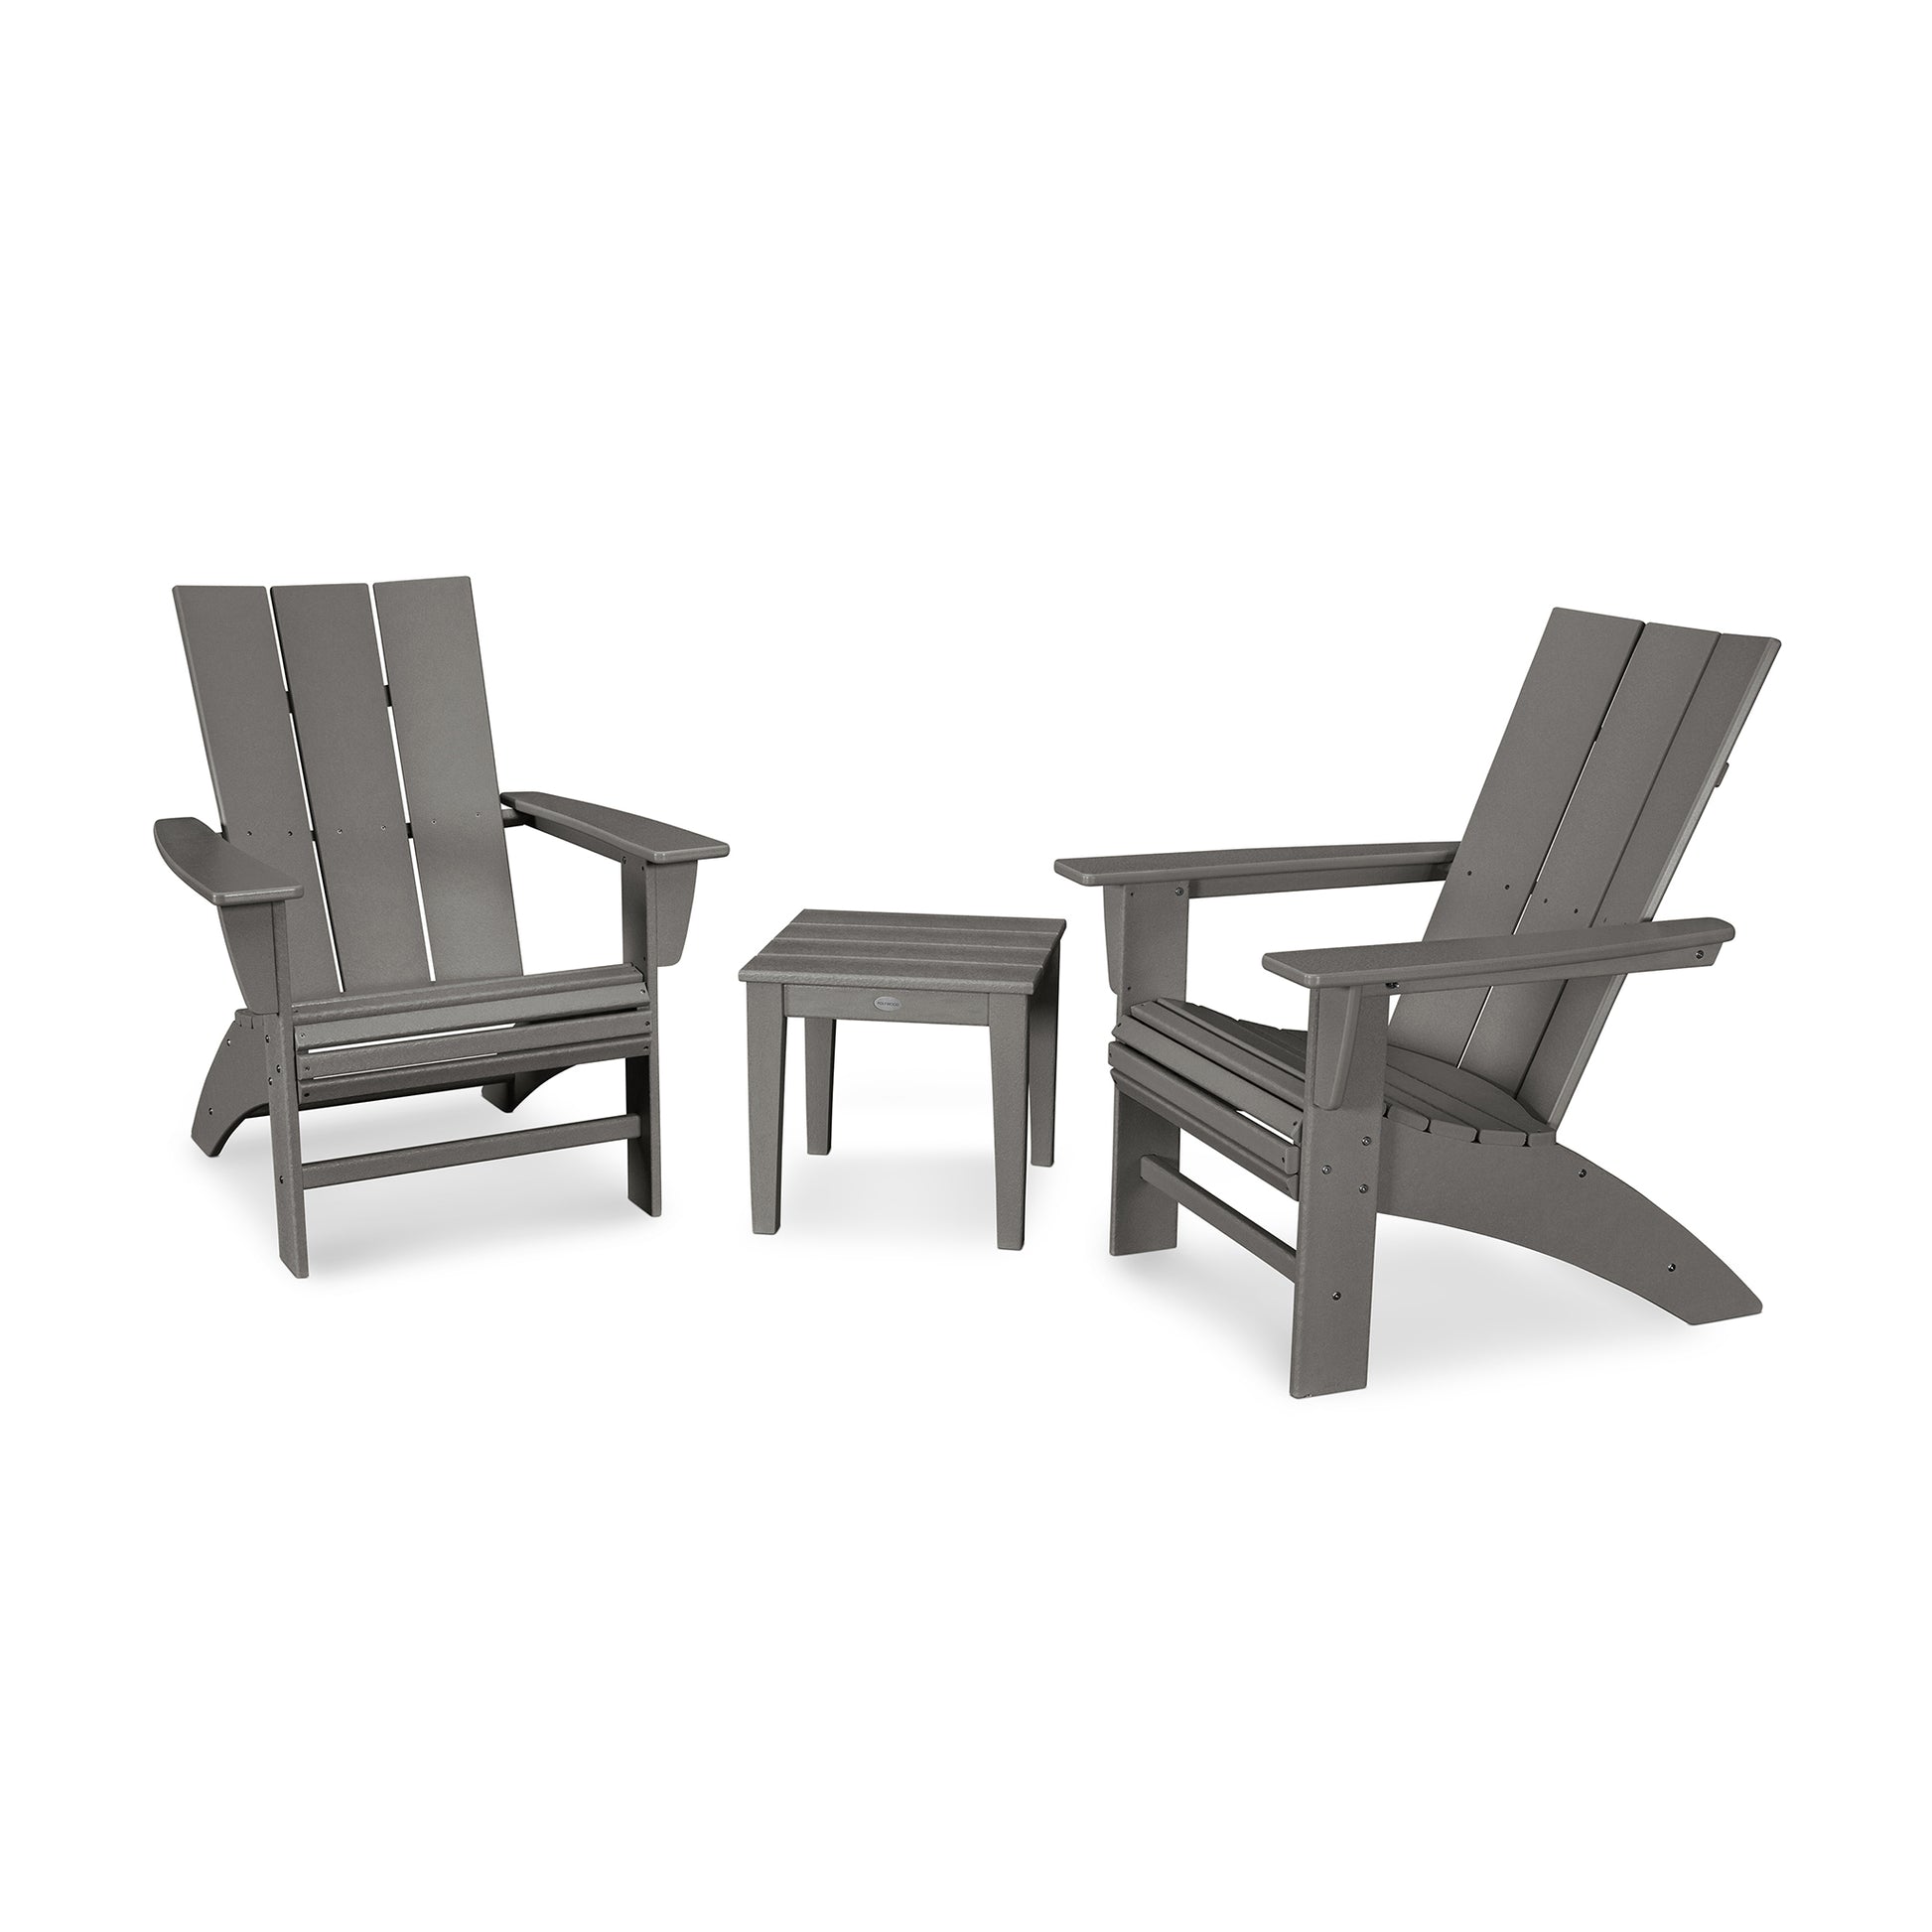 Two gray POLYWOOD Modern Curveback Adirondack chairs and a small matching side table on a white background. The chairs, crafted from POLYWOOD® lumber, feature a classic slatted design and are angled slightly towards.